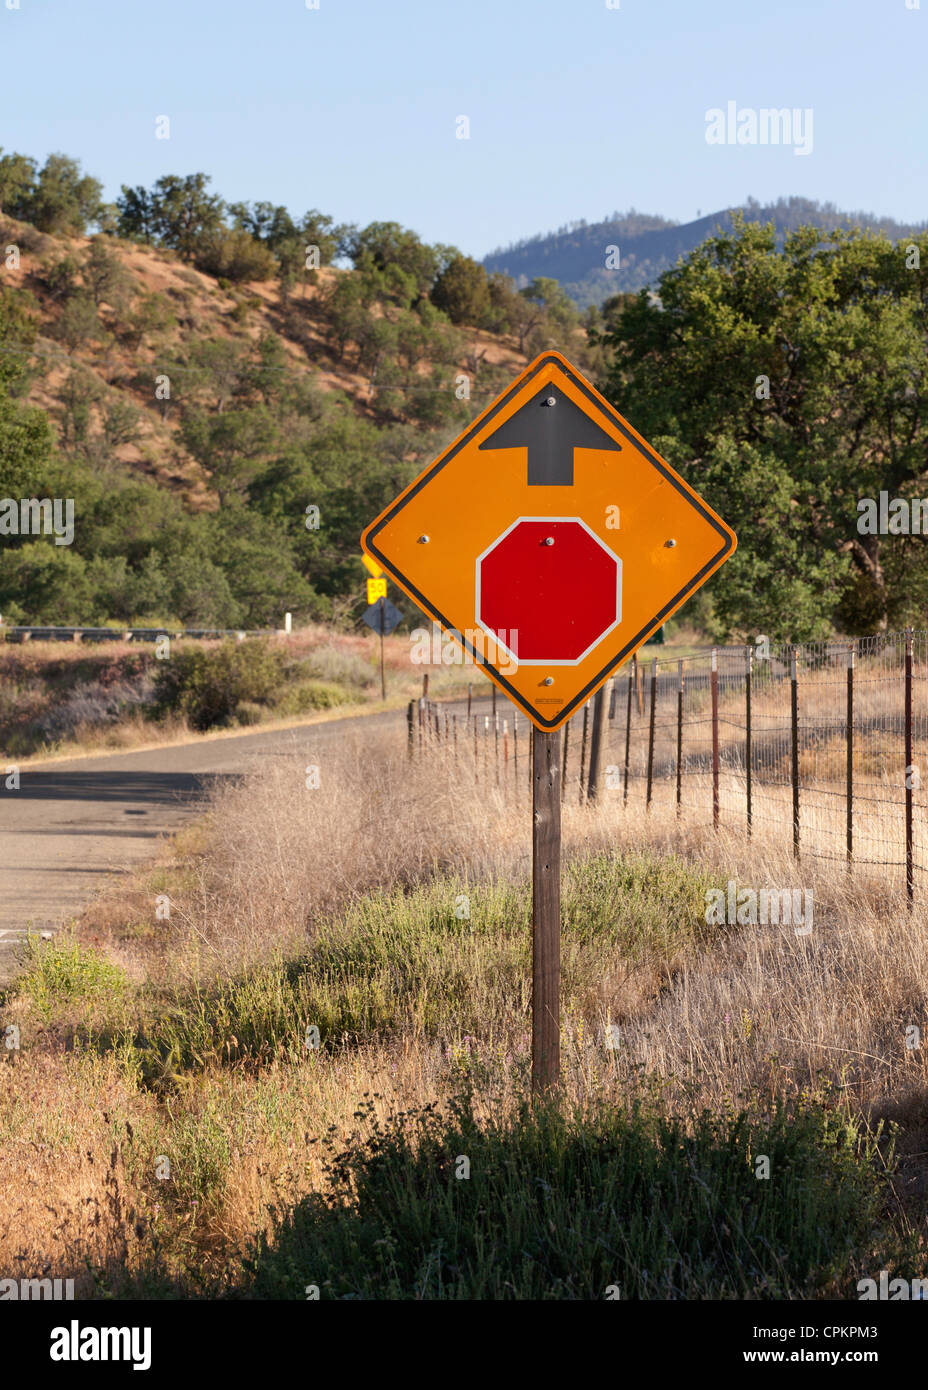 A stop sign on rural road - California USA Stock Photo